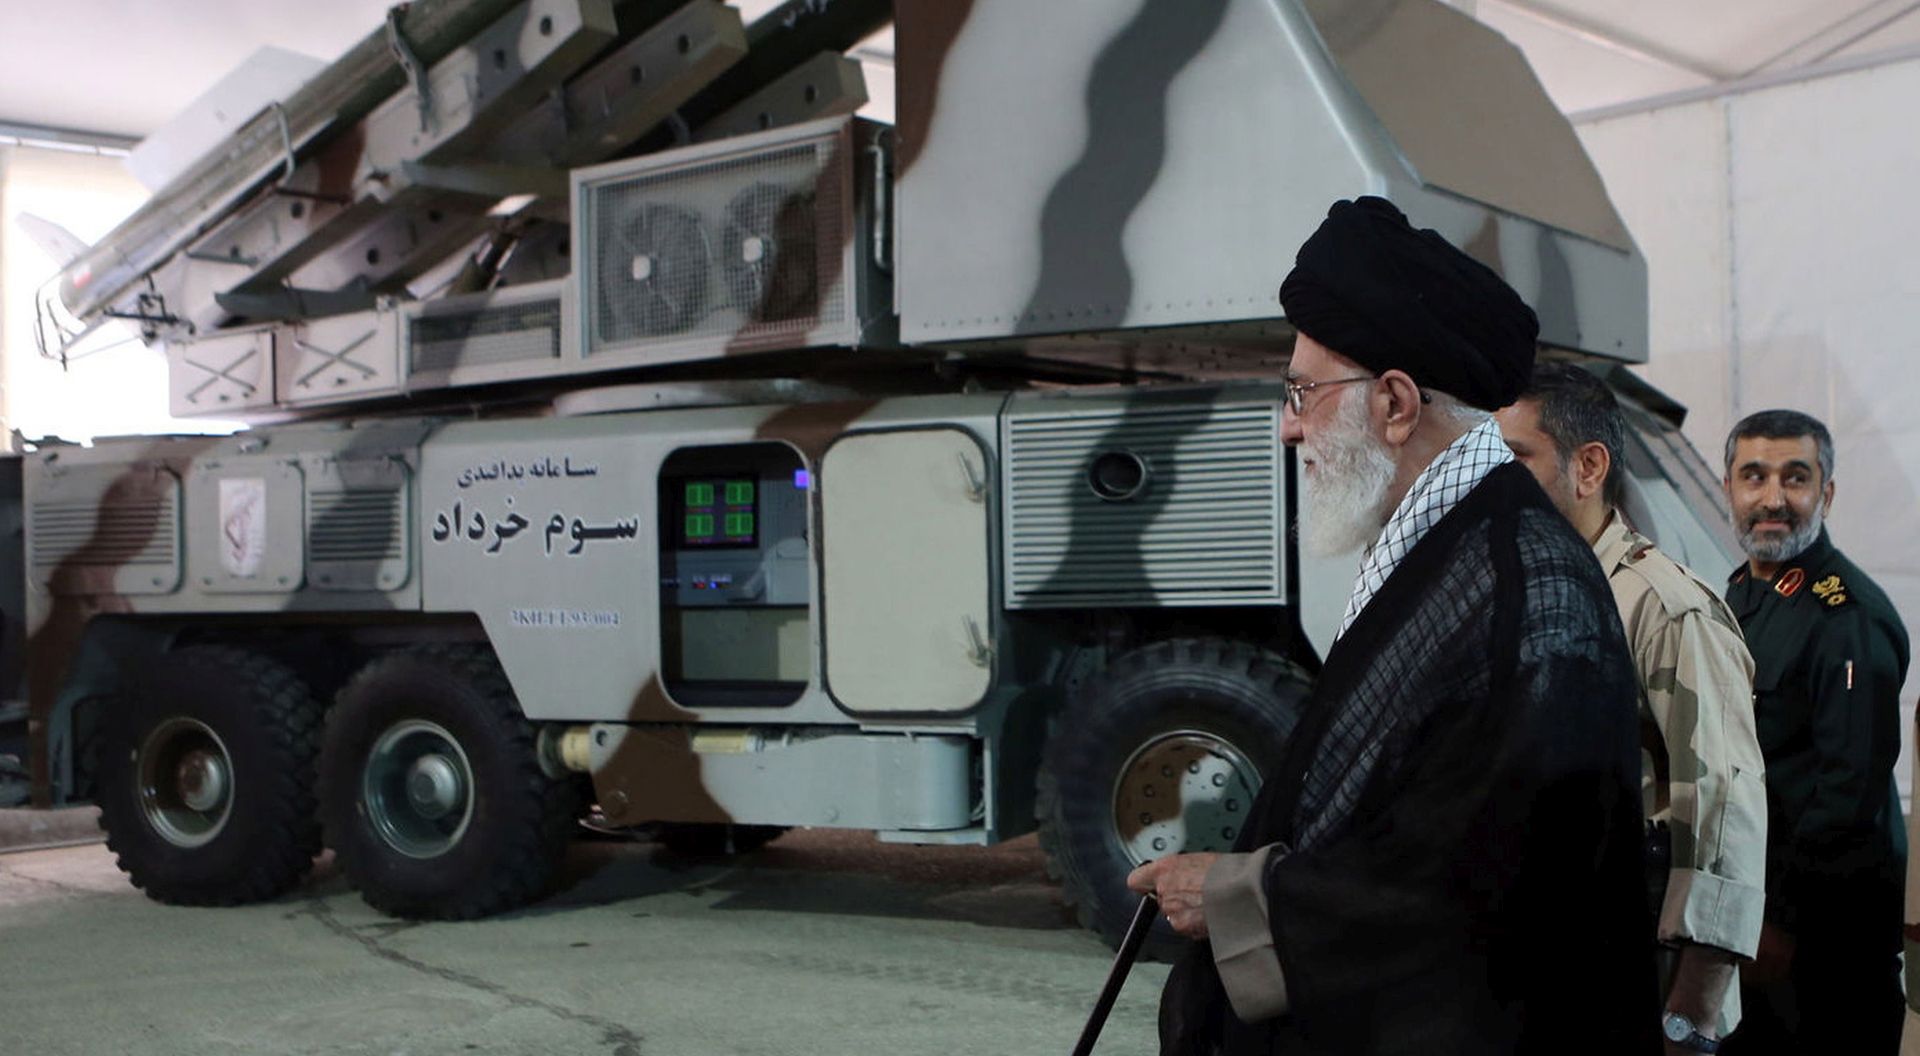 epa07662745 A handout file picture made available by Iranian Supreme Leader Office shows Iranian Supreme Leader Ali Khamenei next to Khordad-3 missile system during a revolutionary guard air force achievement exhibition in Tehran, 11 May 2014 (issued 21 June 2019). Media reported on 20 June 2019 that a US surveillance drone RQ-4A was shot down by an Iranian surface-to-air missile. Iran claims that the drone was in Iran airspace as US says the drone was flying over international water.  EPA/HO HANDOUT  HANDOUT EDITORIAL USE ONLY/NO SALES